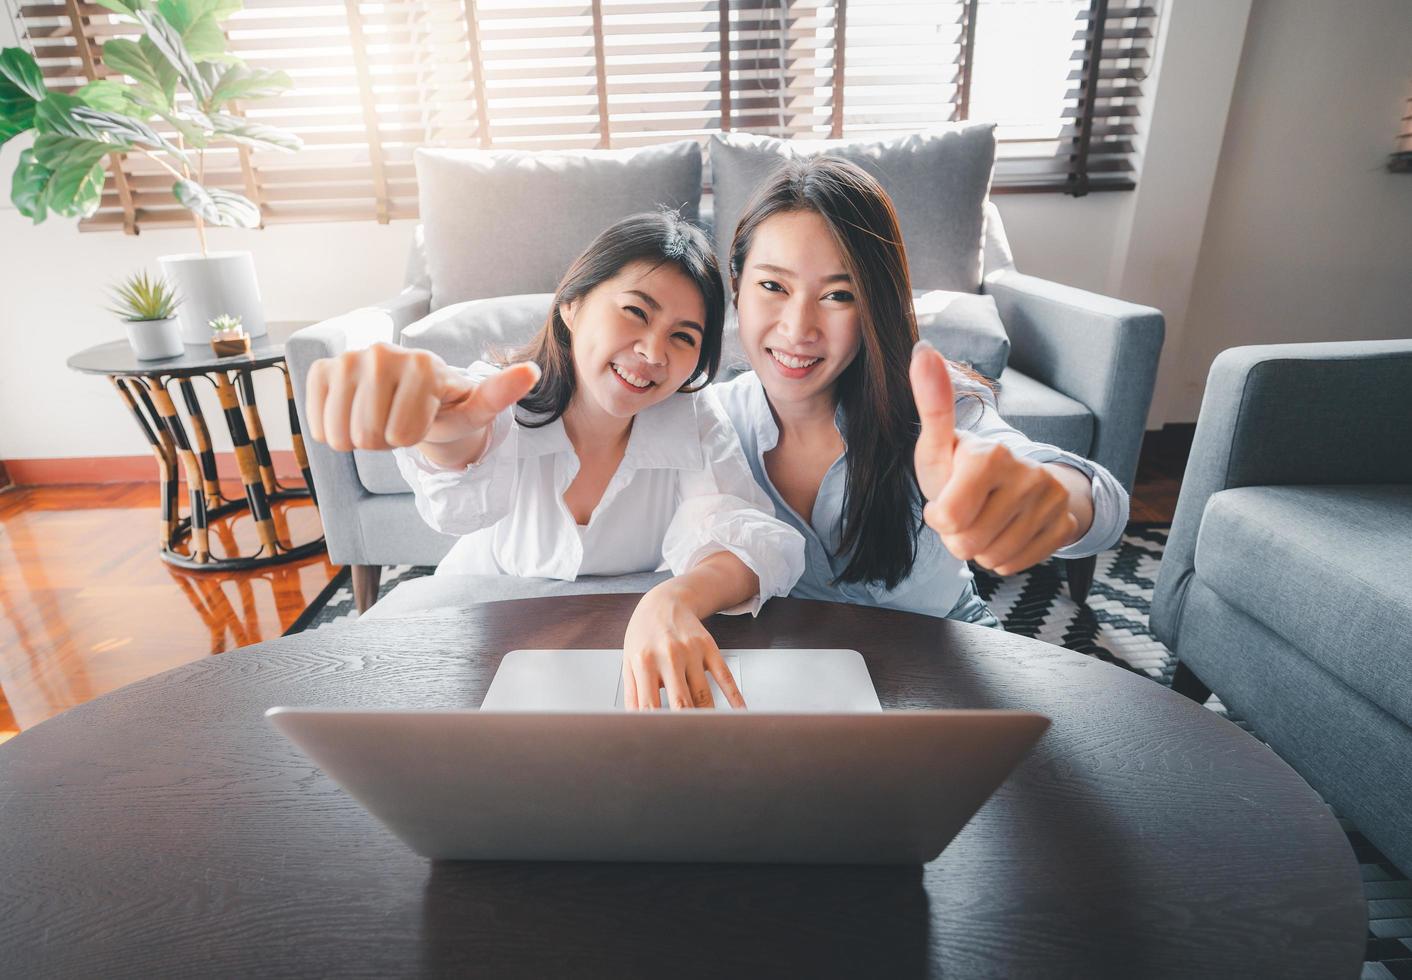 Asian women friends using laptop giving thumbs up gesture photo